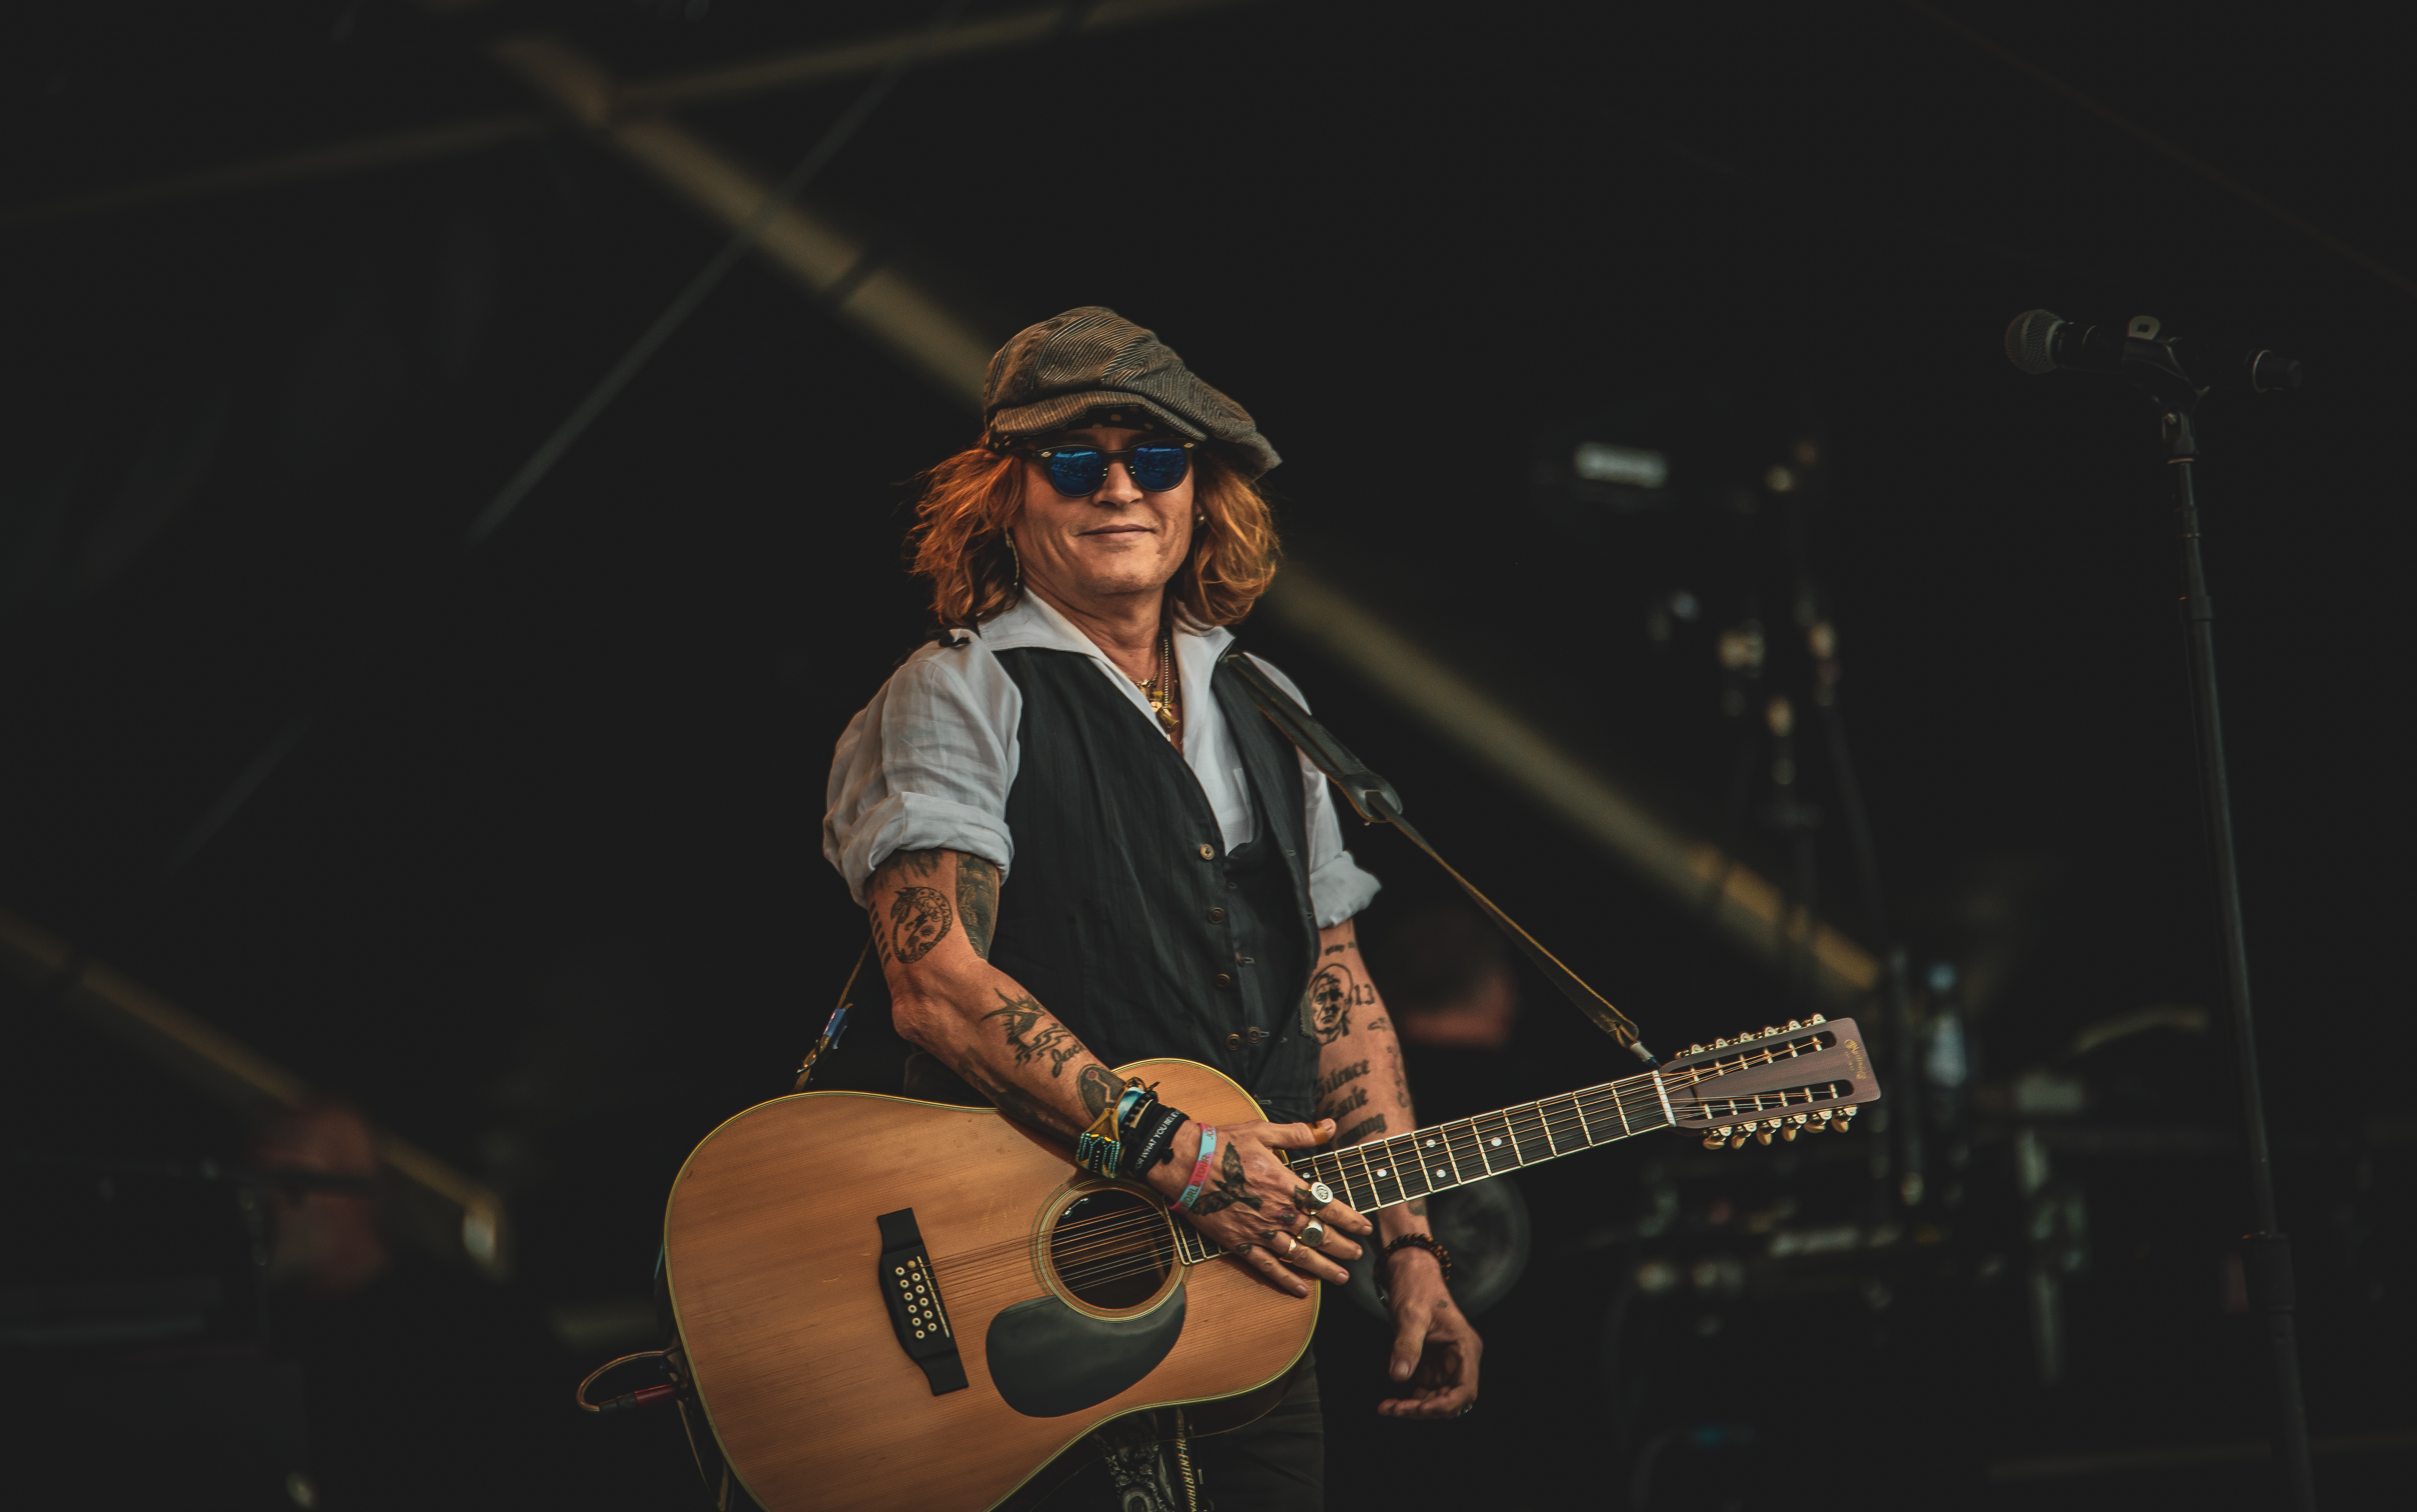 Johnny Depp performing in Helsinki, Finland on June 19, 2022 | Source: Getty Images